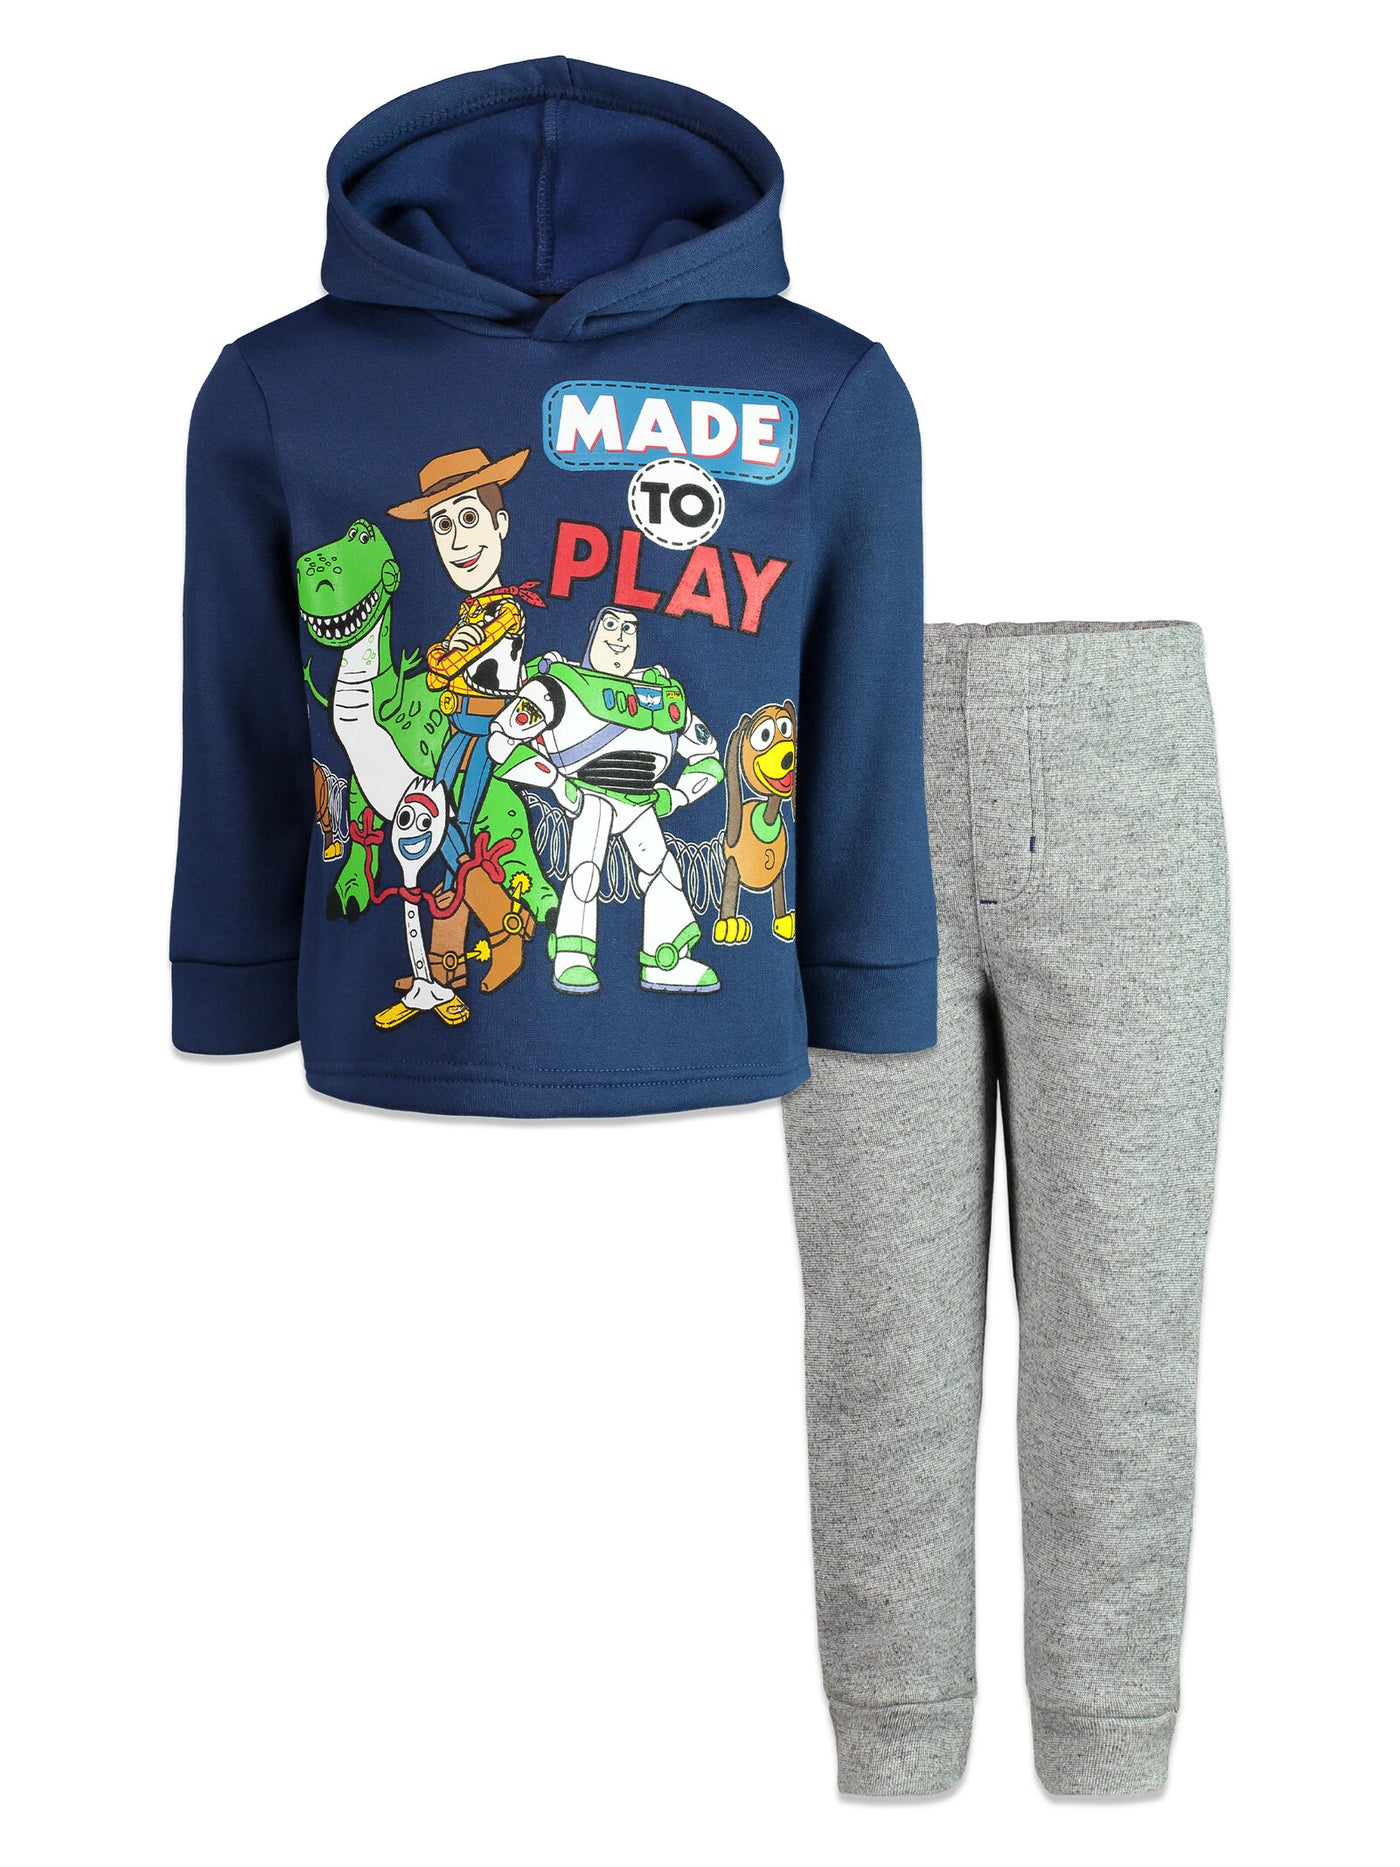 Disney Pixar Toy Story Fleece Hoodie and Jogger Pants Outfit Set